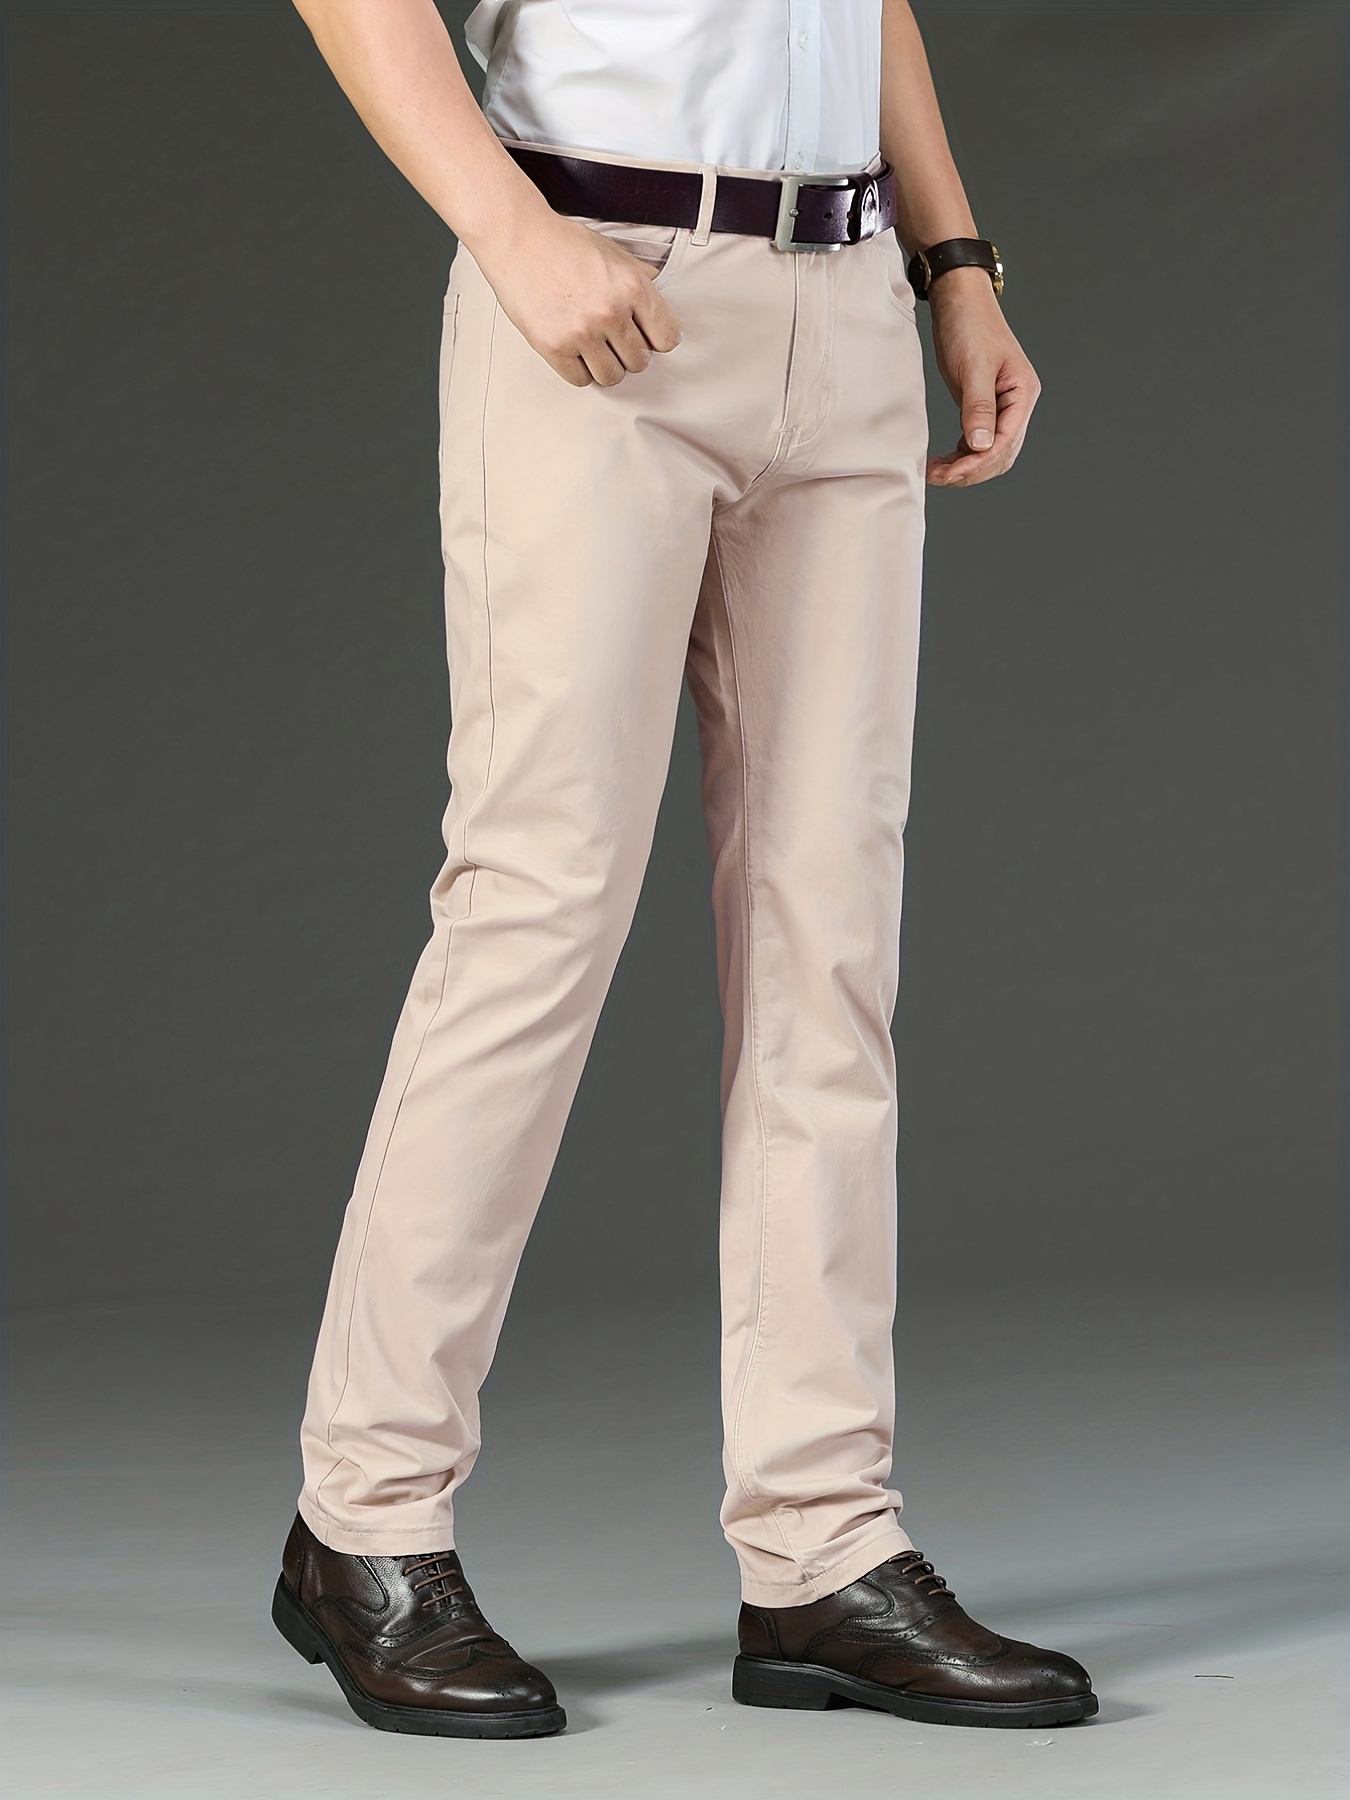 Mens Solid Color Simple Casual Business Slim Straight Fashion Trousers Pants